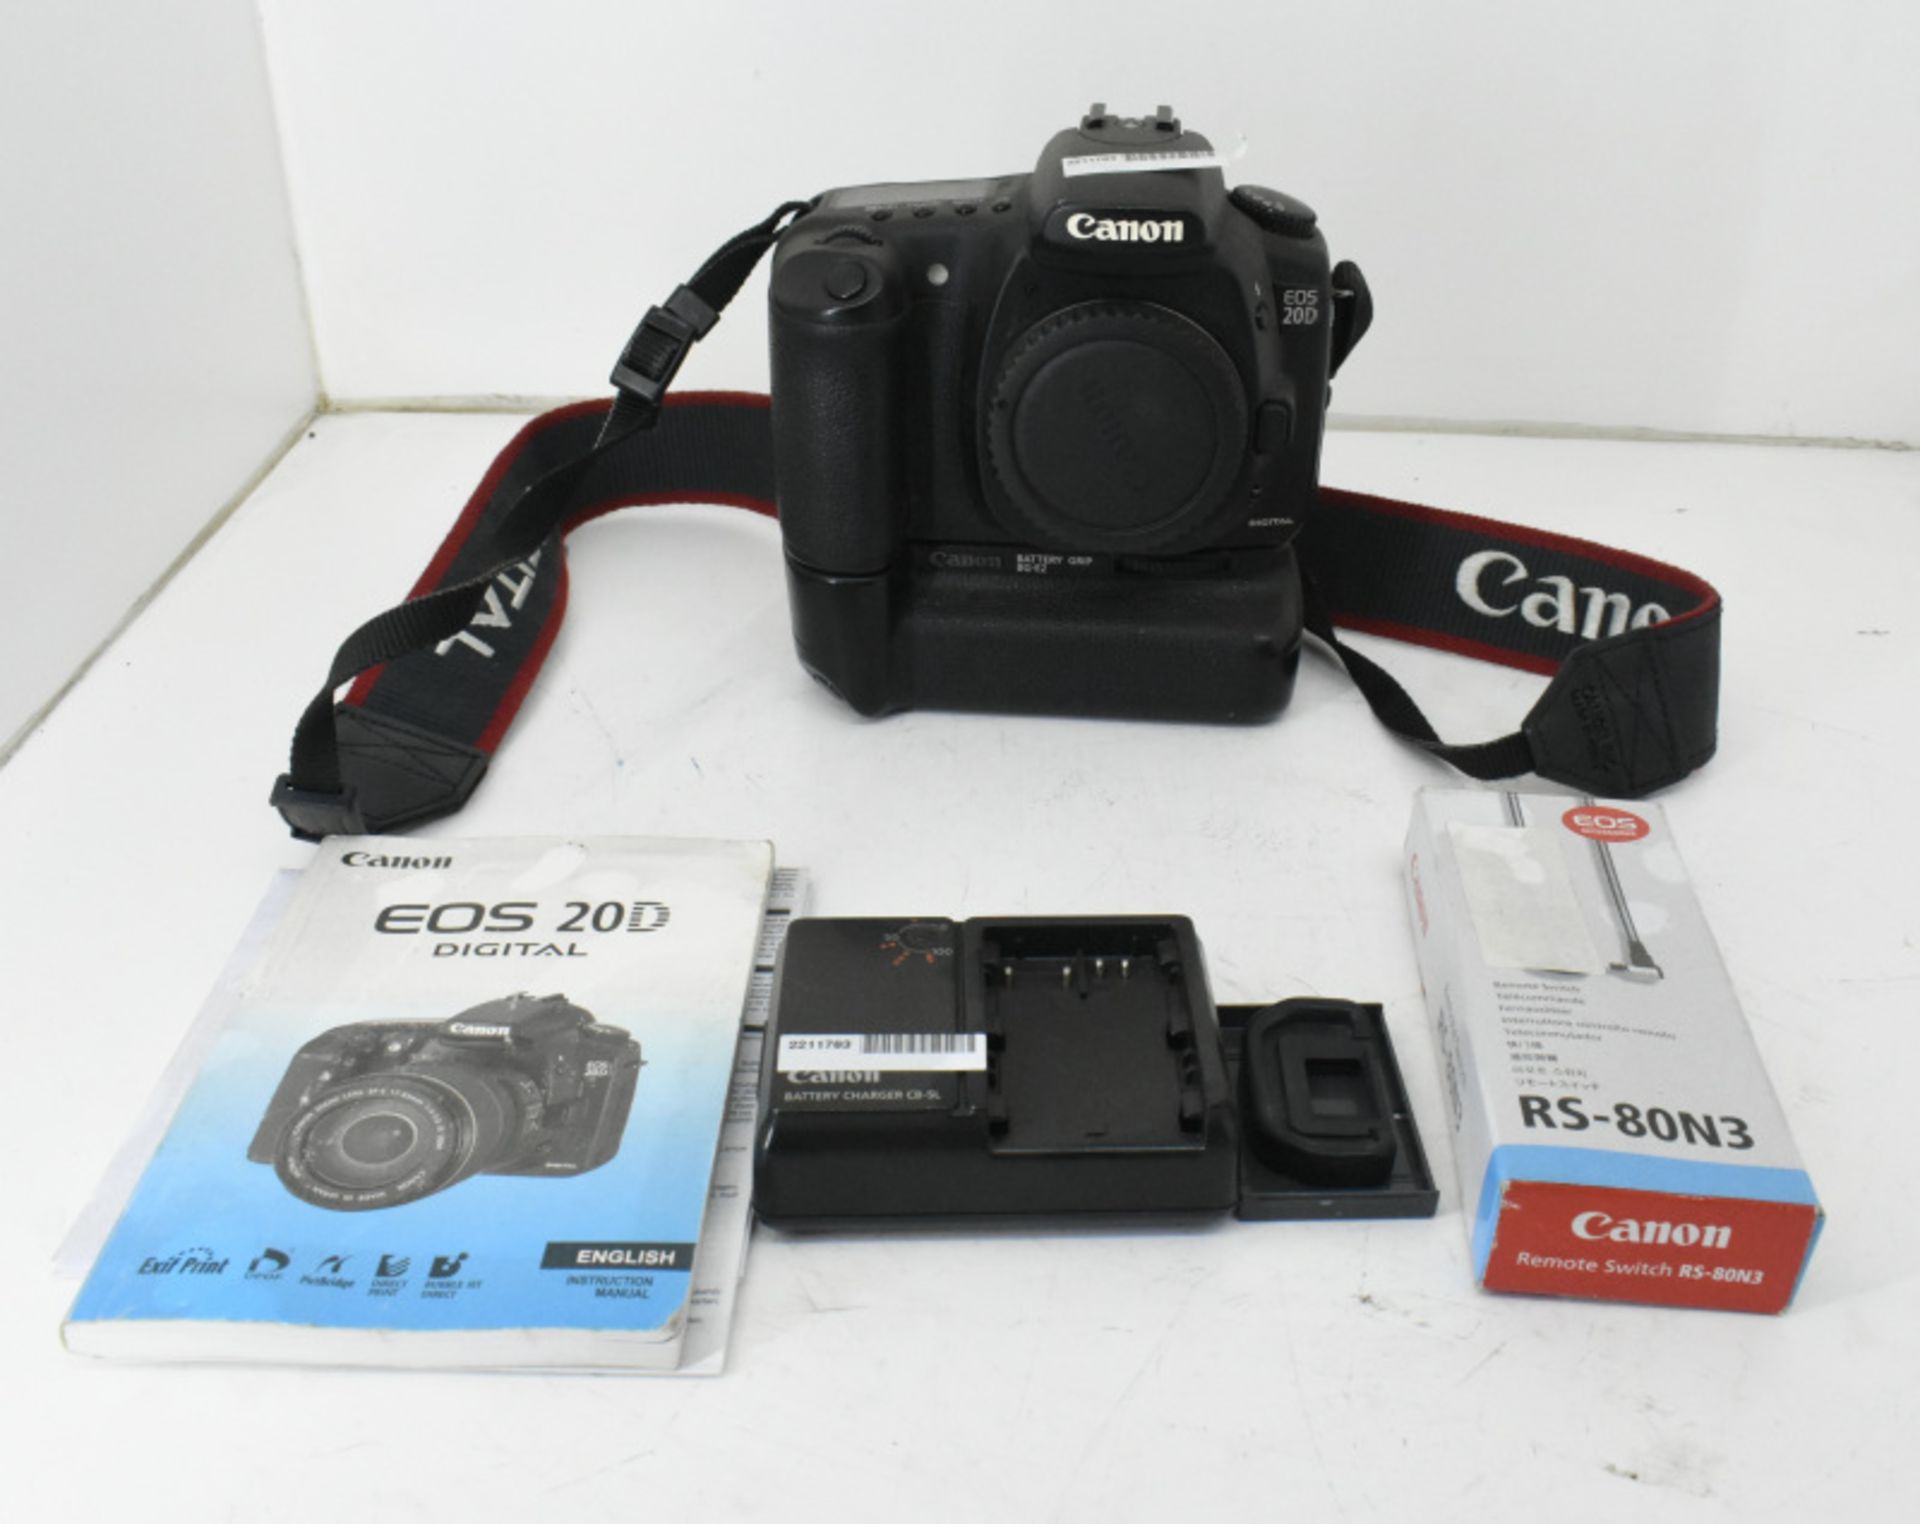 Canon EOS 20D DS126061 digital camera with accessories